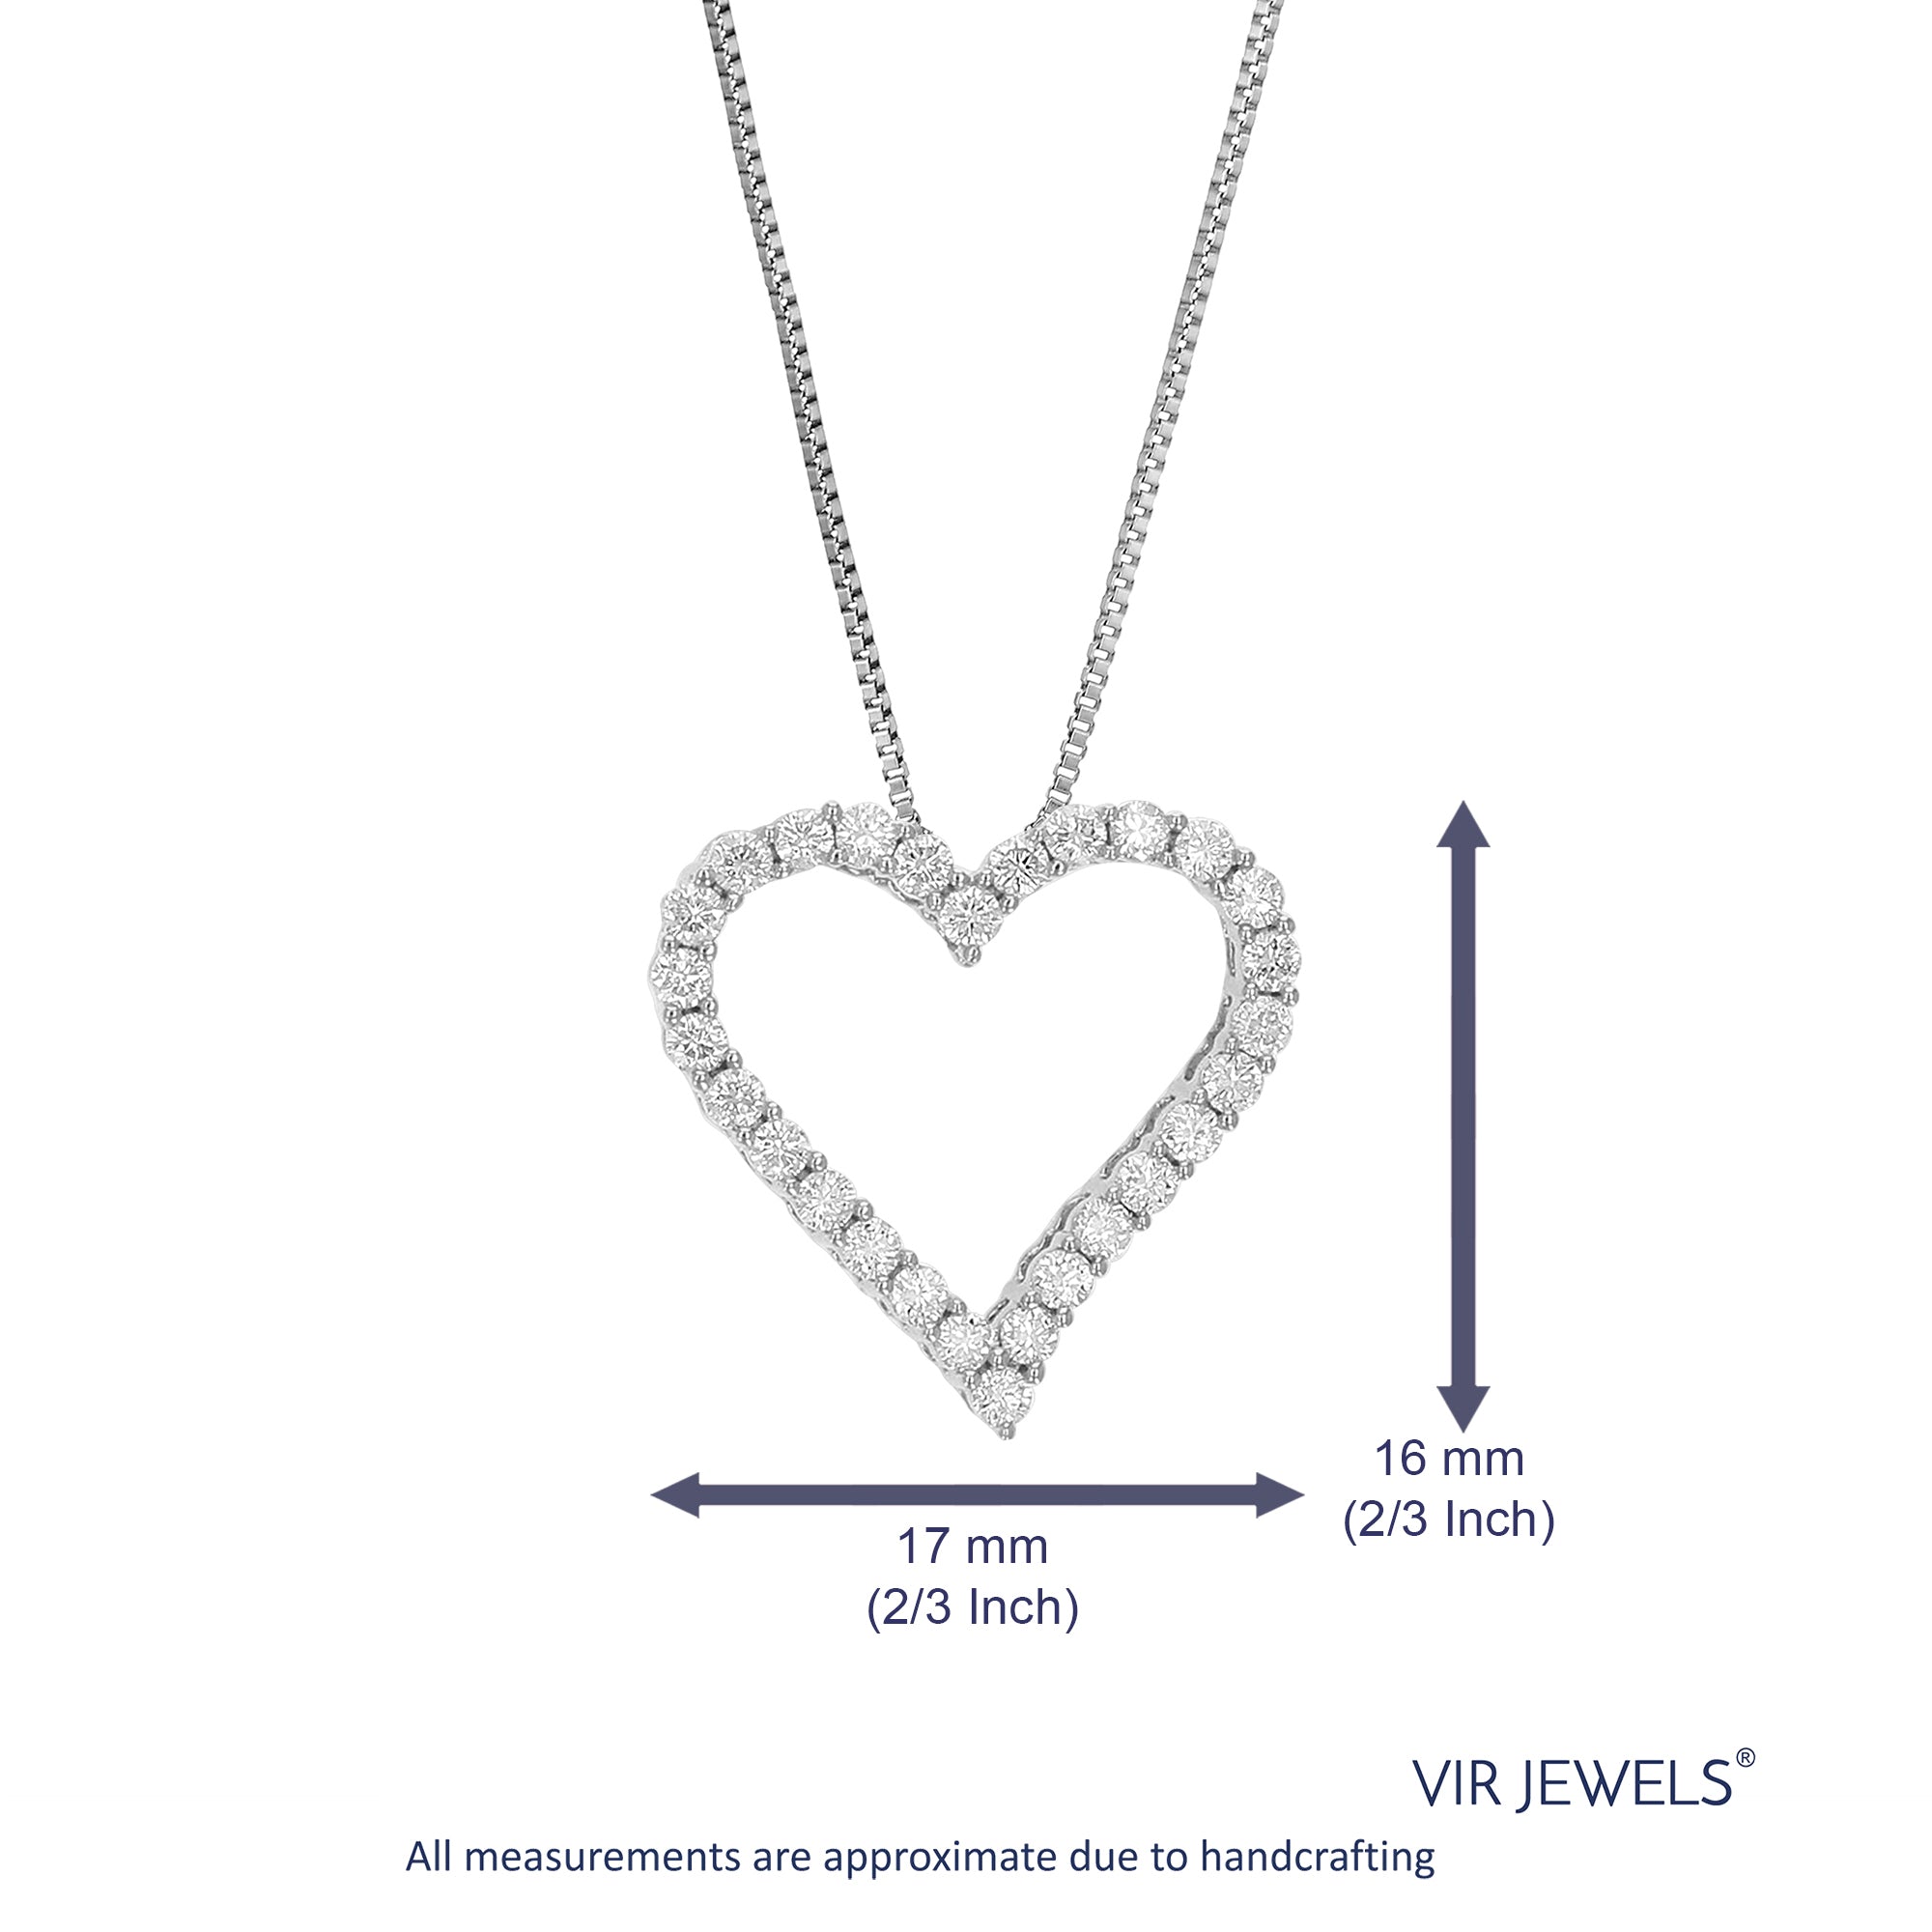 1/2 cttw Diamond Pendant Necklace for Women, Lab Grown Diamond Heart Pendant Necklace in .925 Sterling Silver with Chain, Size 2/3 Inch